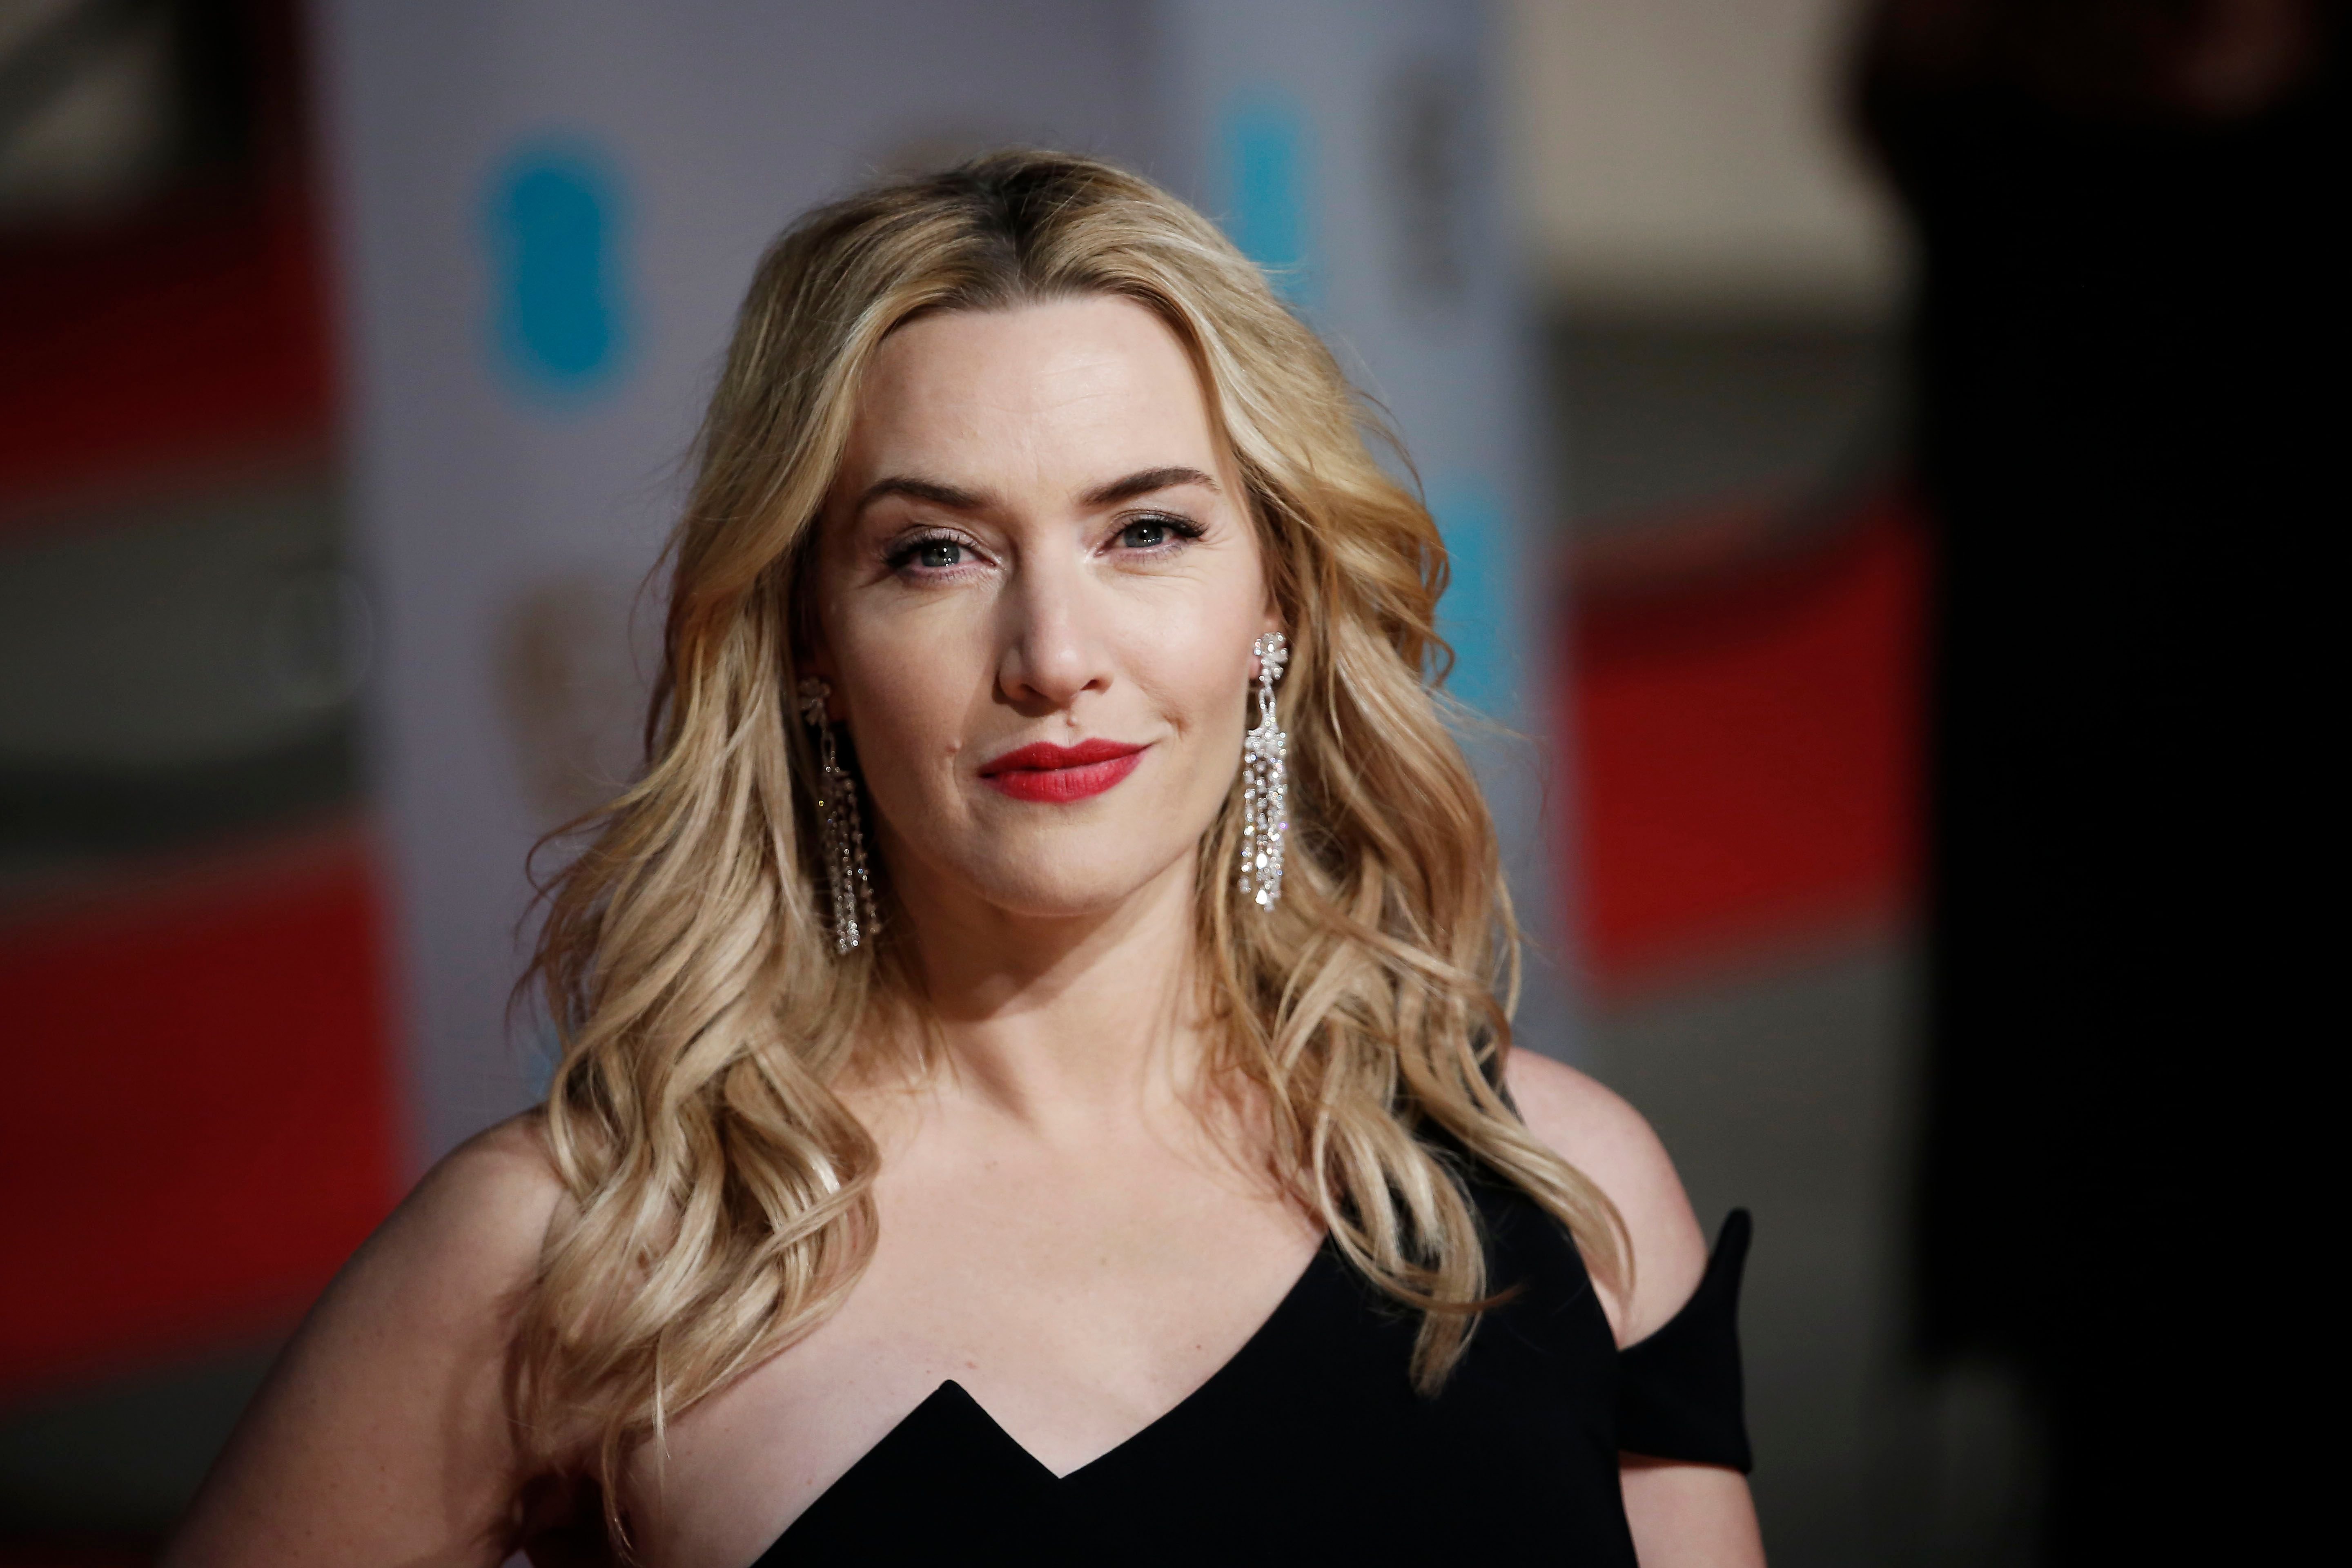  Kate Winslet at the EE British Academy Film Awards in 2016 in London, England | Source: Getty Images